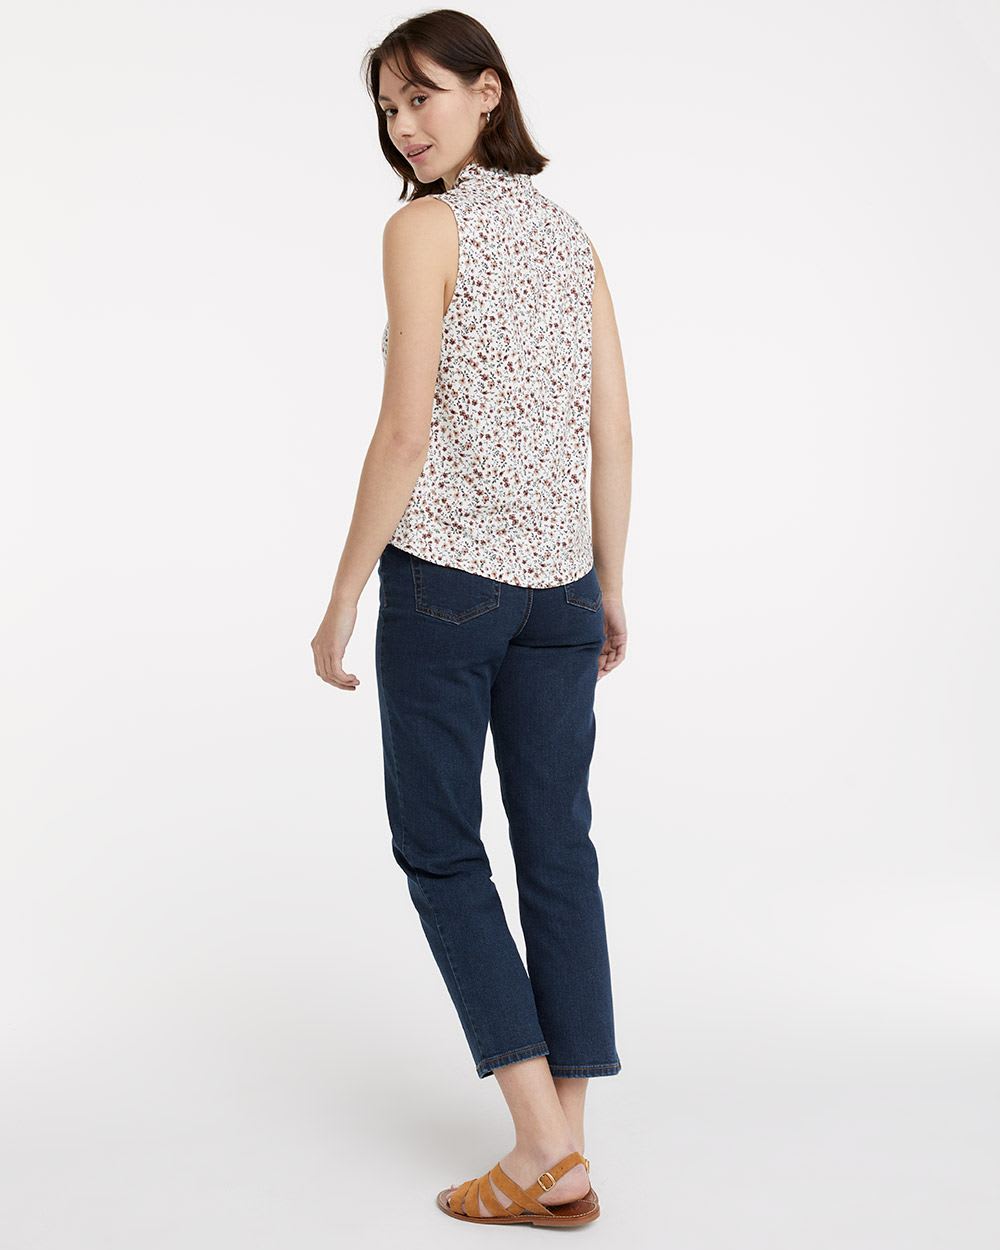 Printed Sleeveless Top with Mock Neck